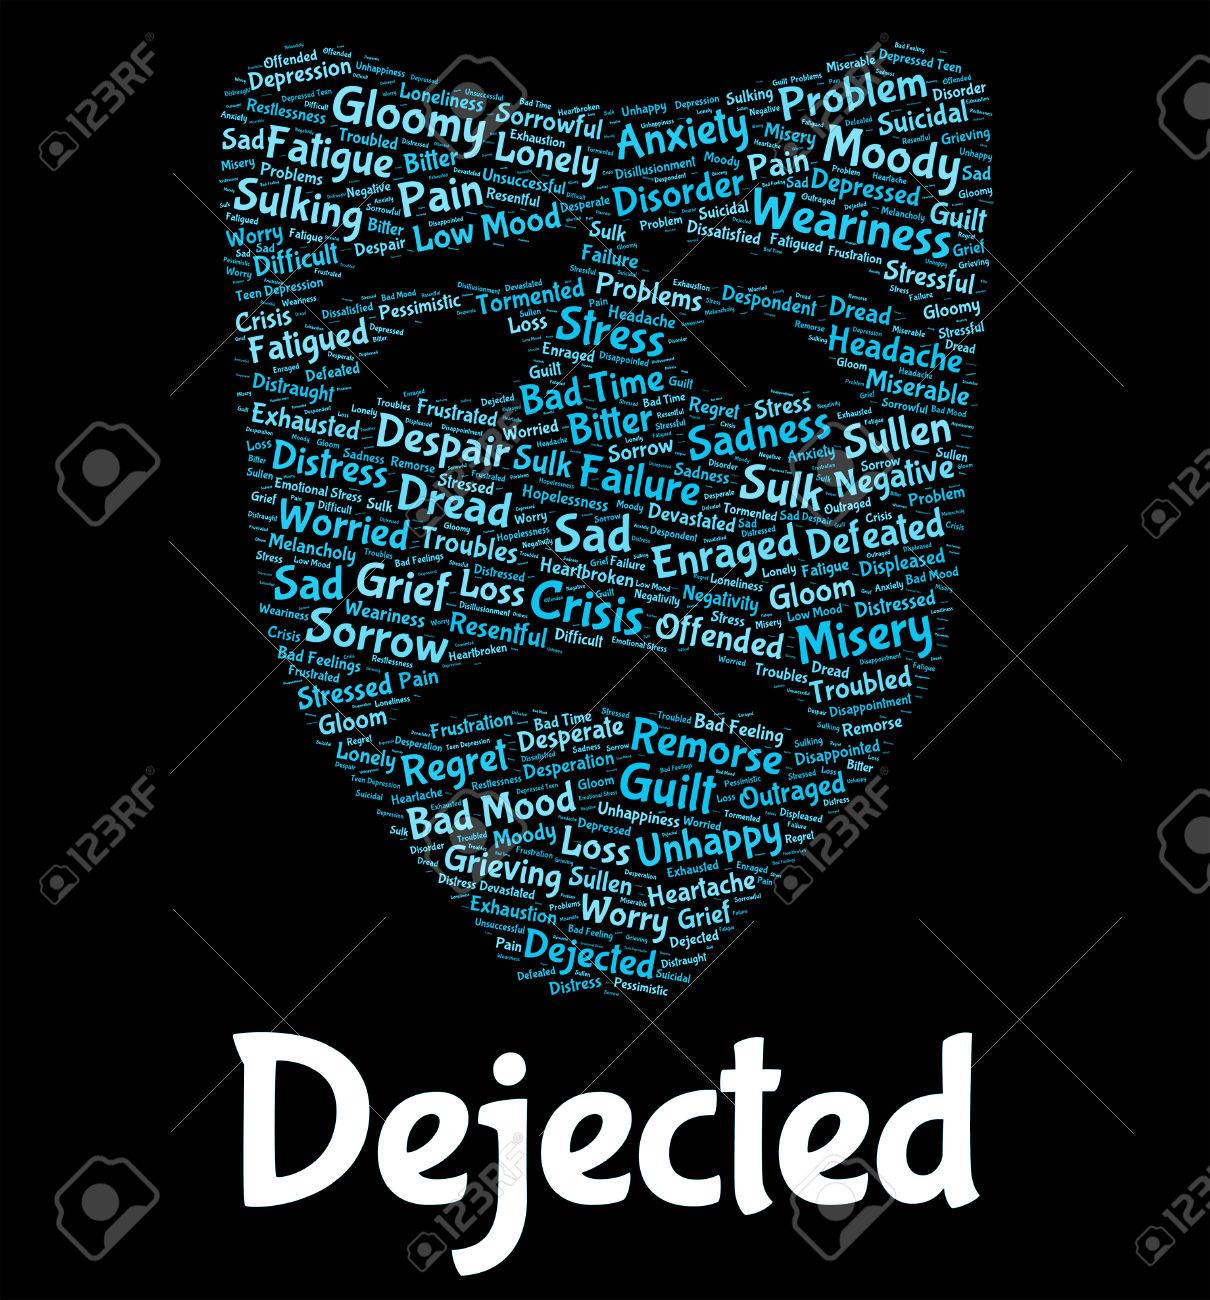 47452897-dejected-word-meaning-wordclouds-words-and-desolate.jpg